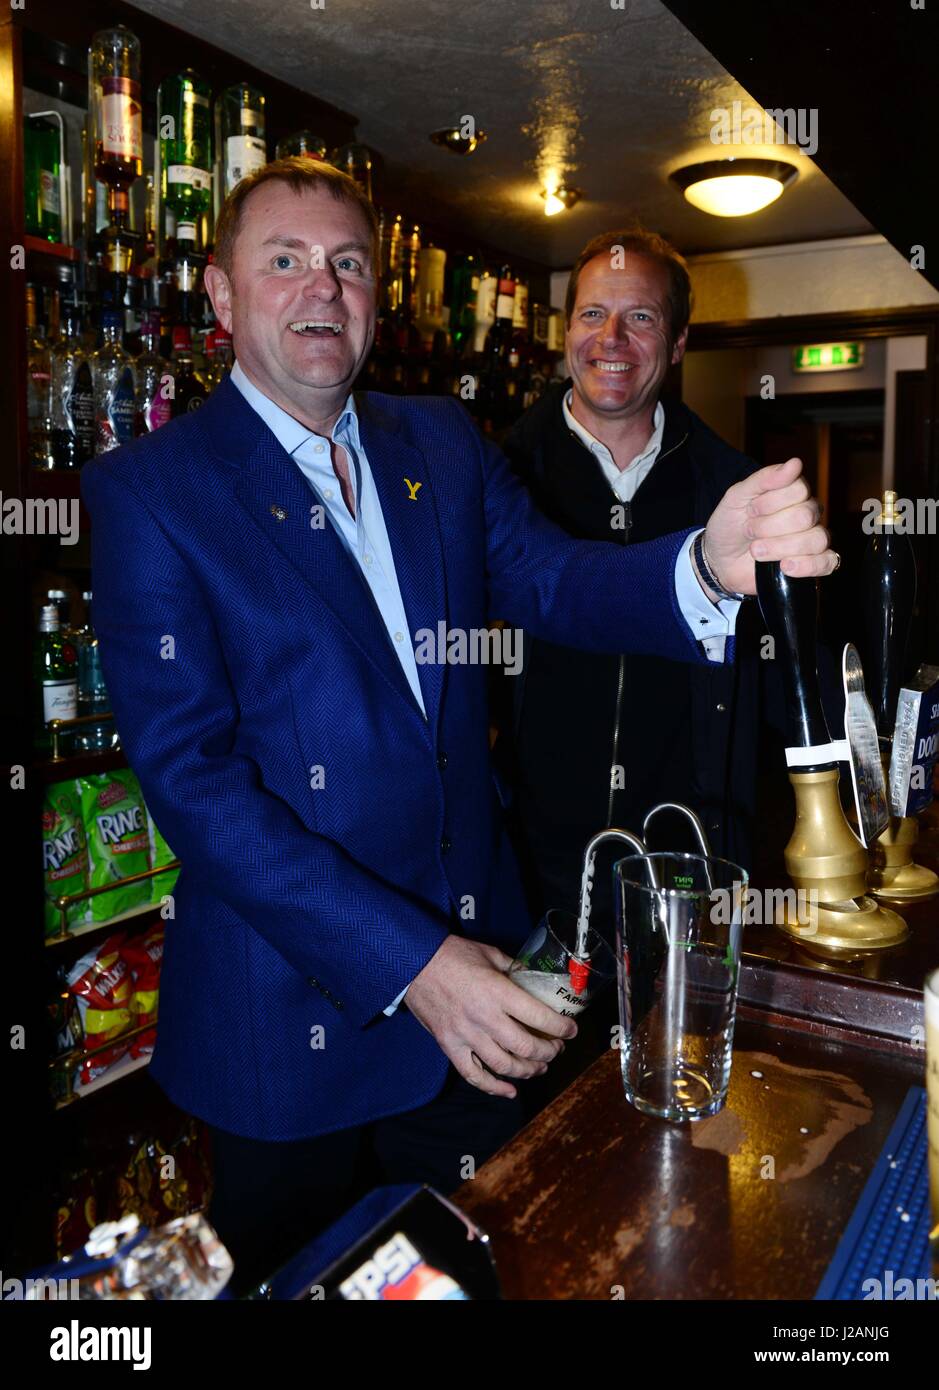 Sir Gary Verity of Welcome to Yorkshire with Tour De France general director Christian Prudhomme (right) in a pub promoting the Tour De Yorkshire. Stock Photo